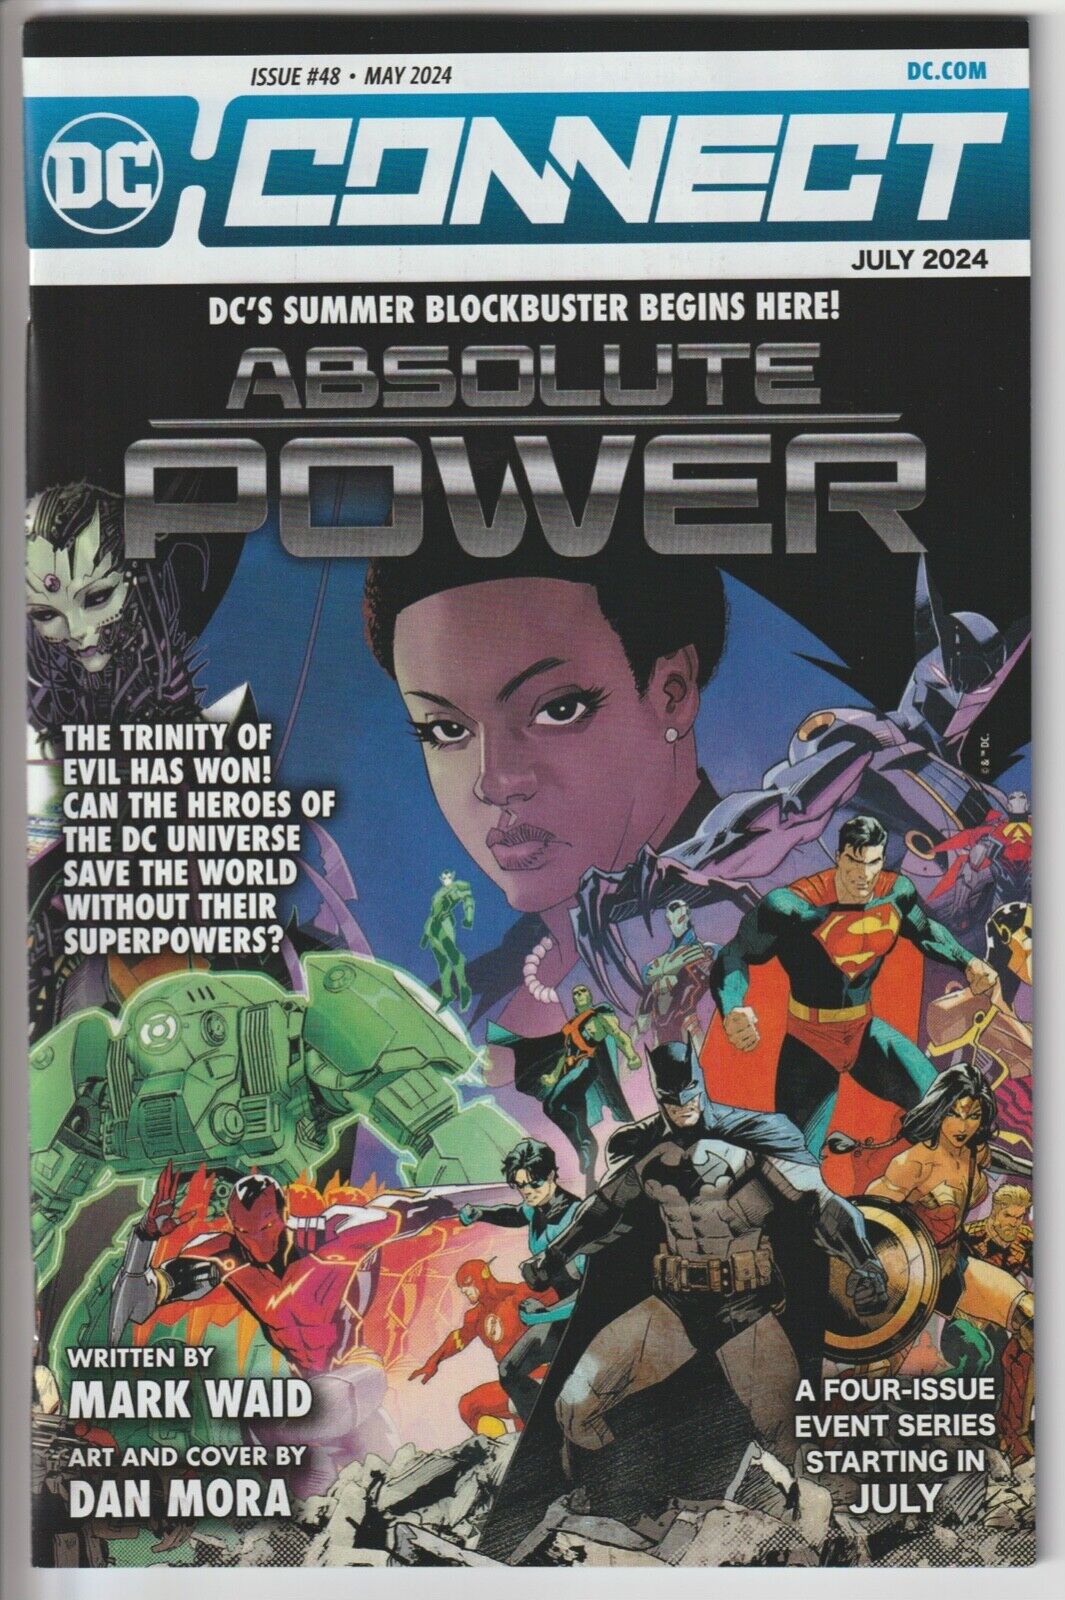 DC Connect Issue #48 May 2024 for July Release